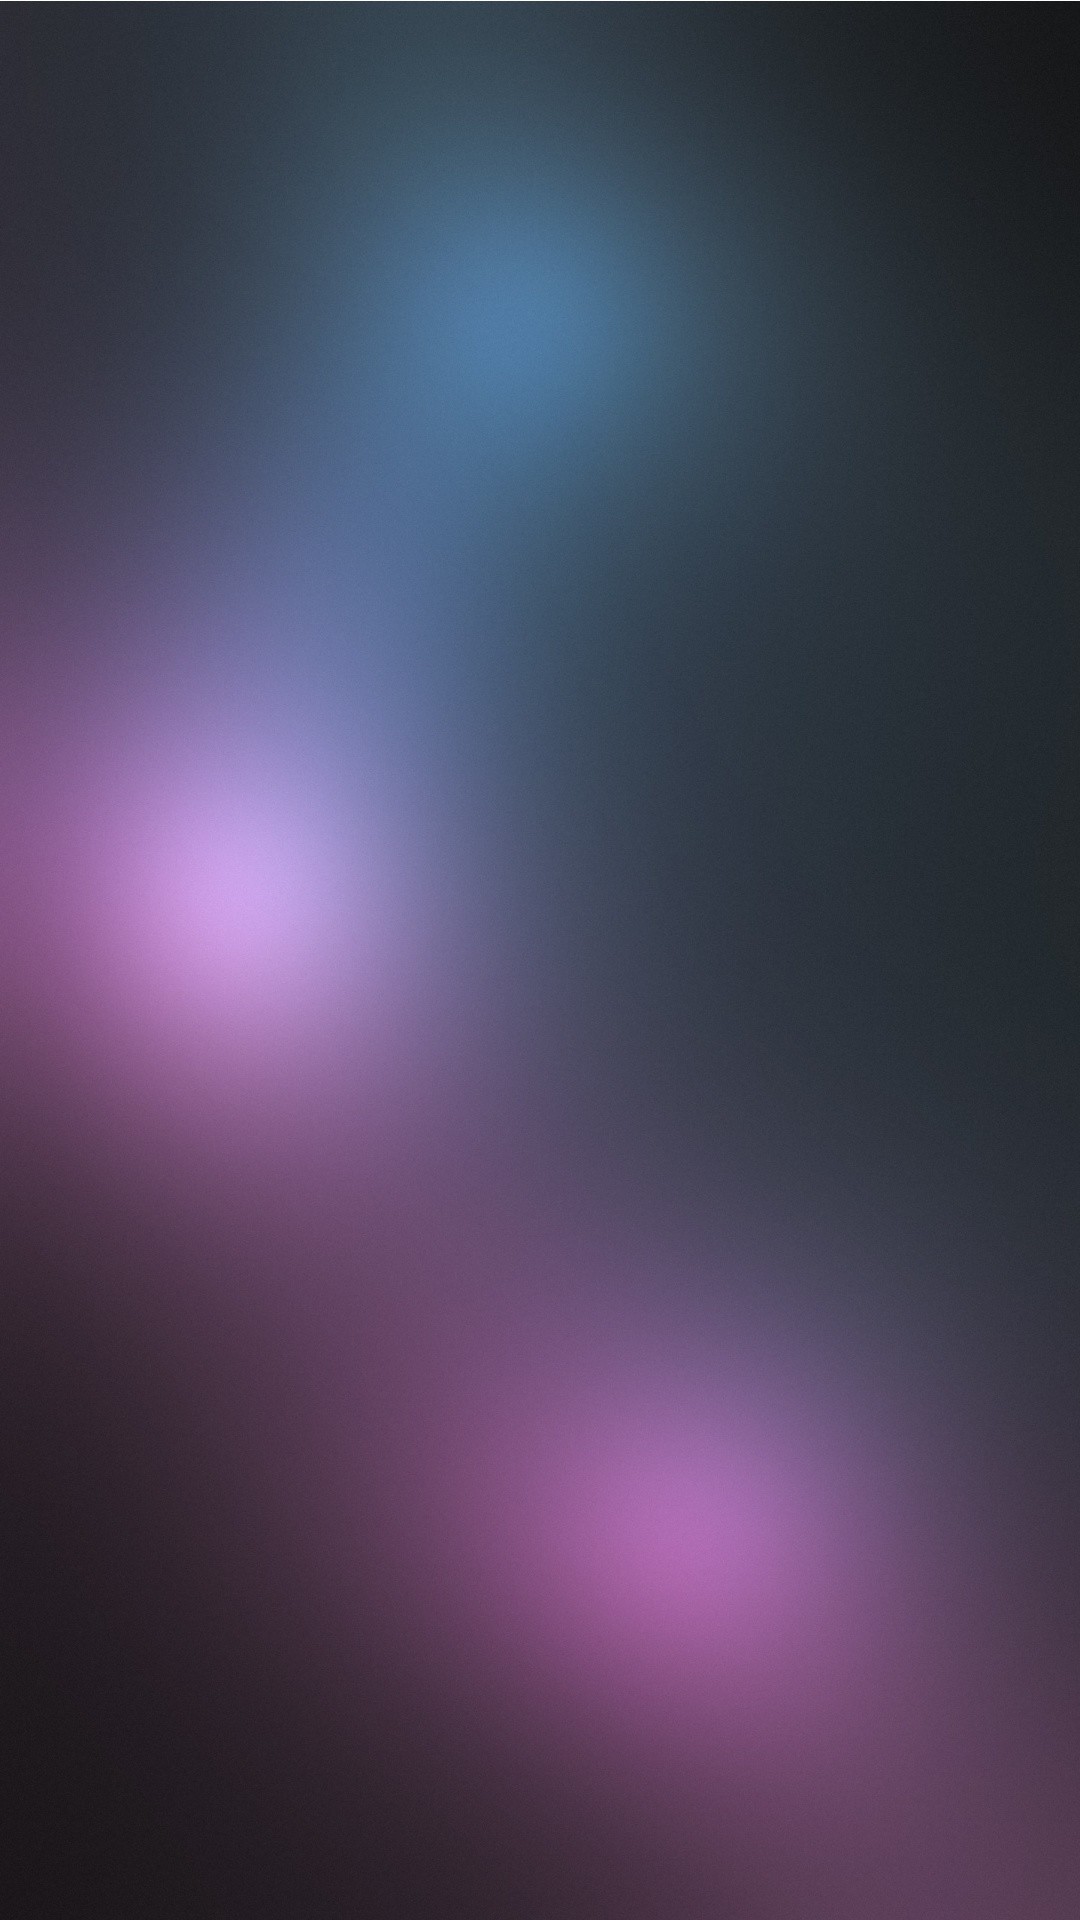 1080x1920 18 Calming blurred lights and gradients wallpapers for iPhone - @mobile9